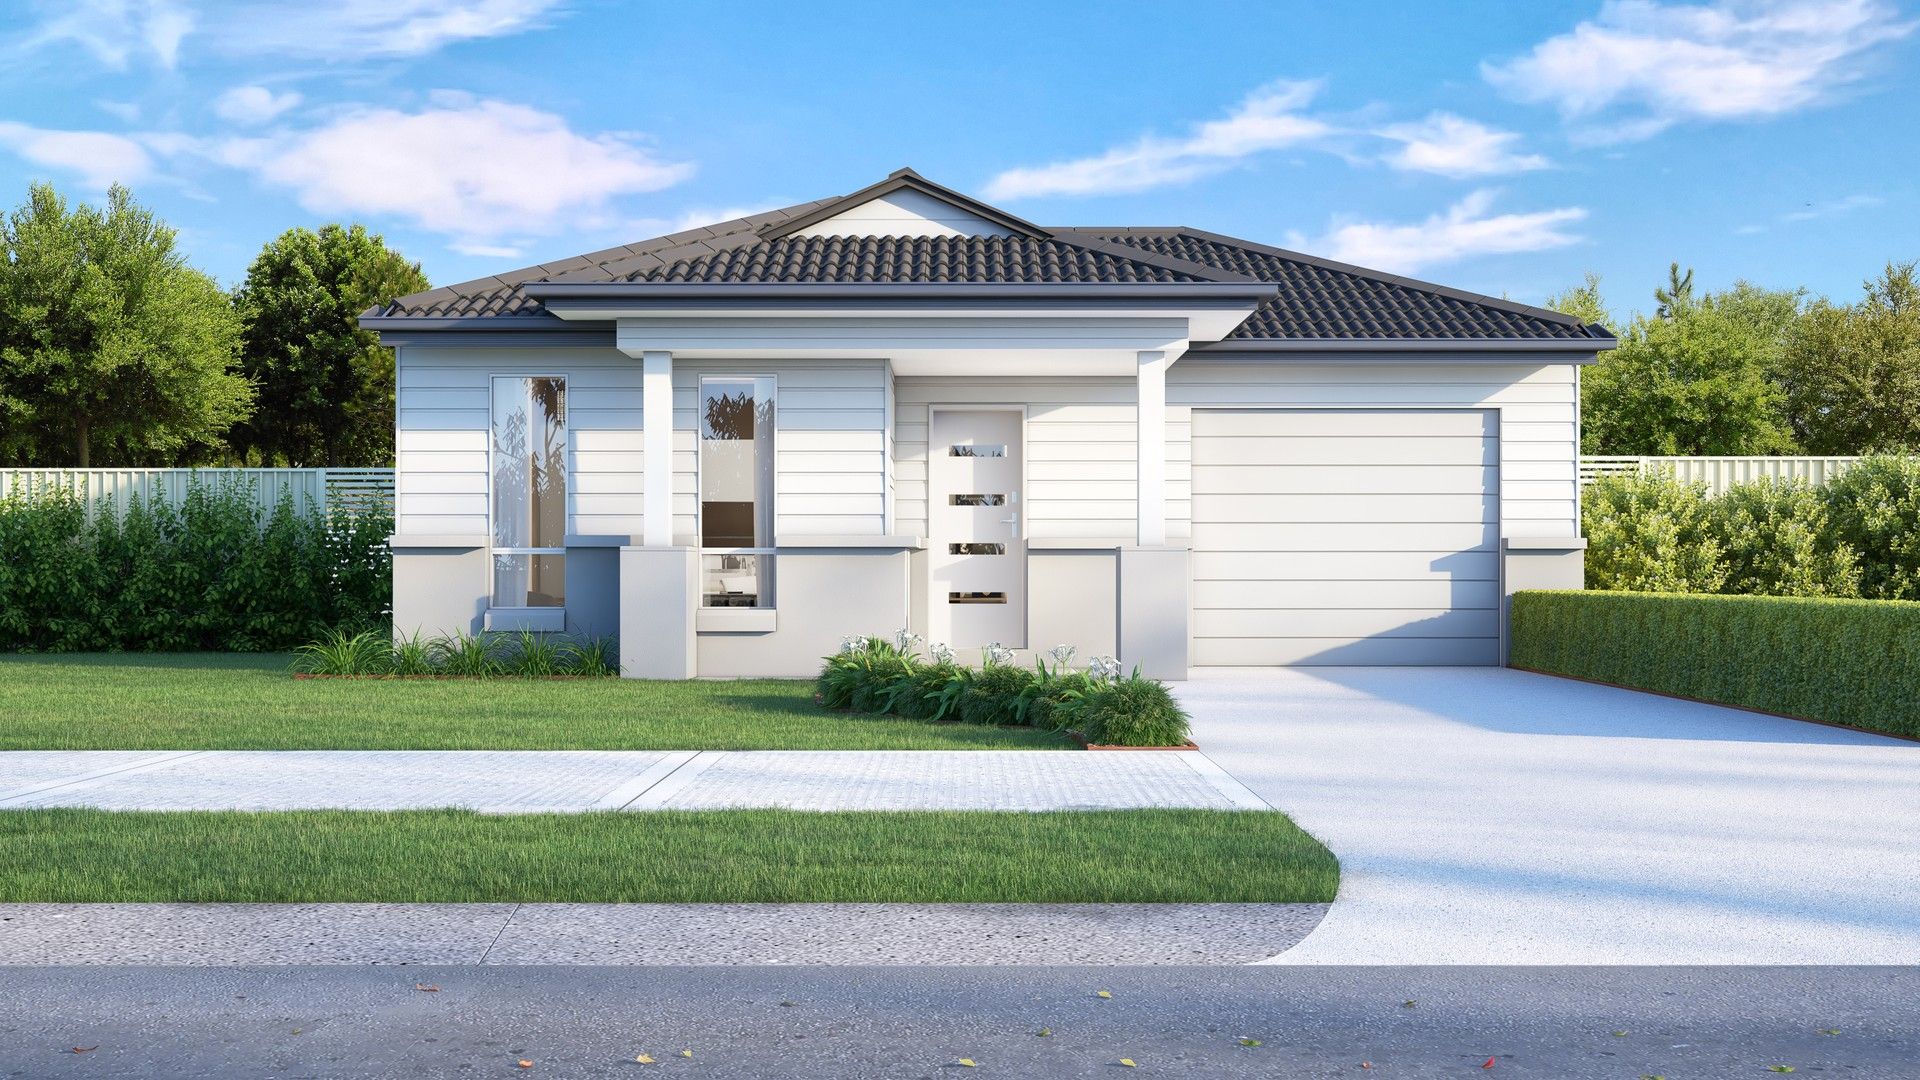 3 bedrooms New House & Land in Lot 3979 Romulea Crescent DIGGERS REST VIC, 3427